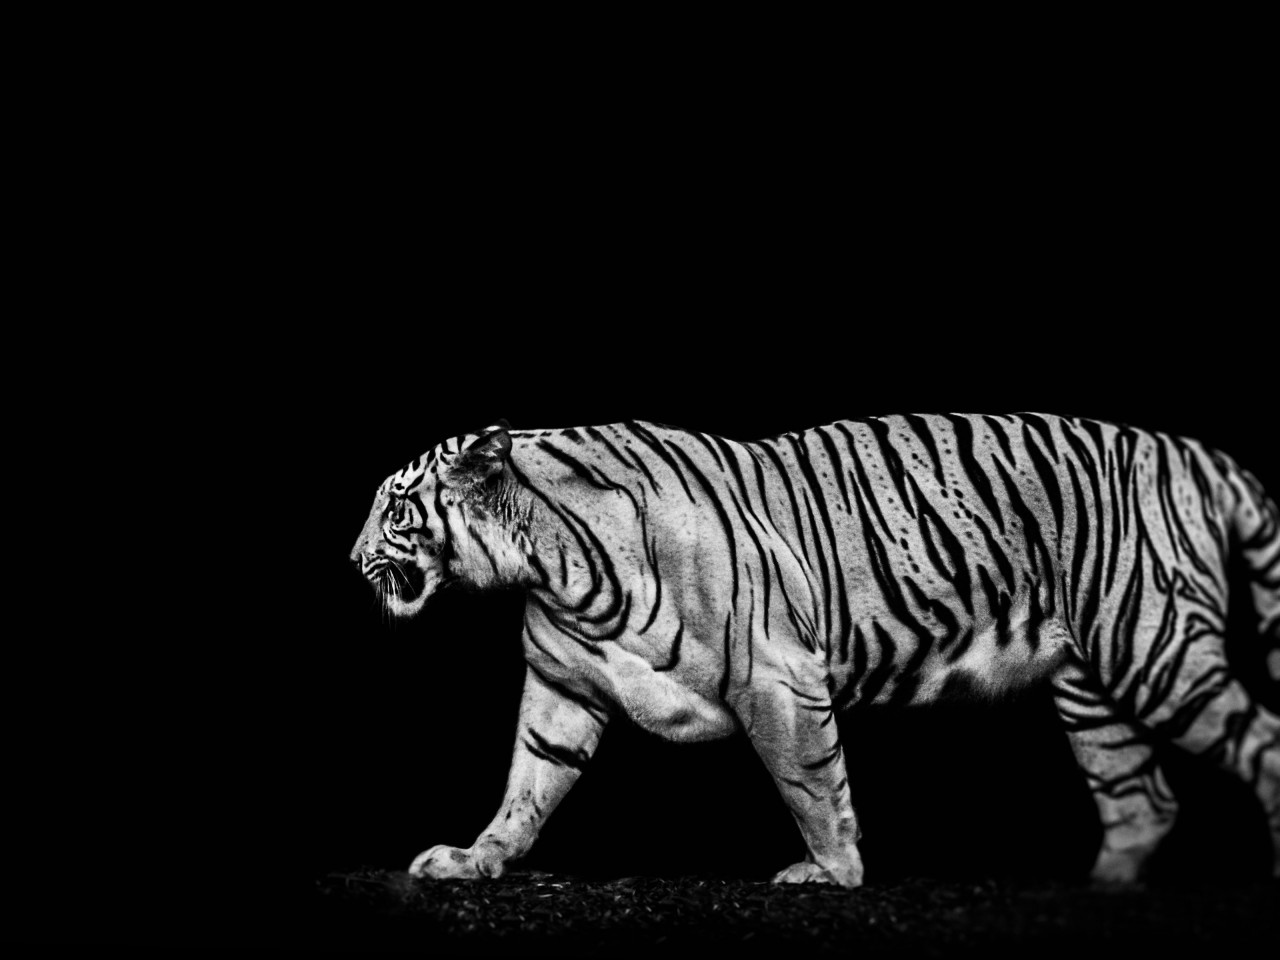 Tiger in the darkness wallpaper 1280x960